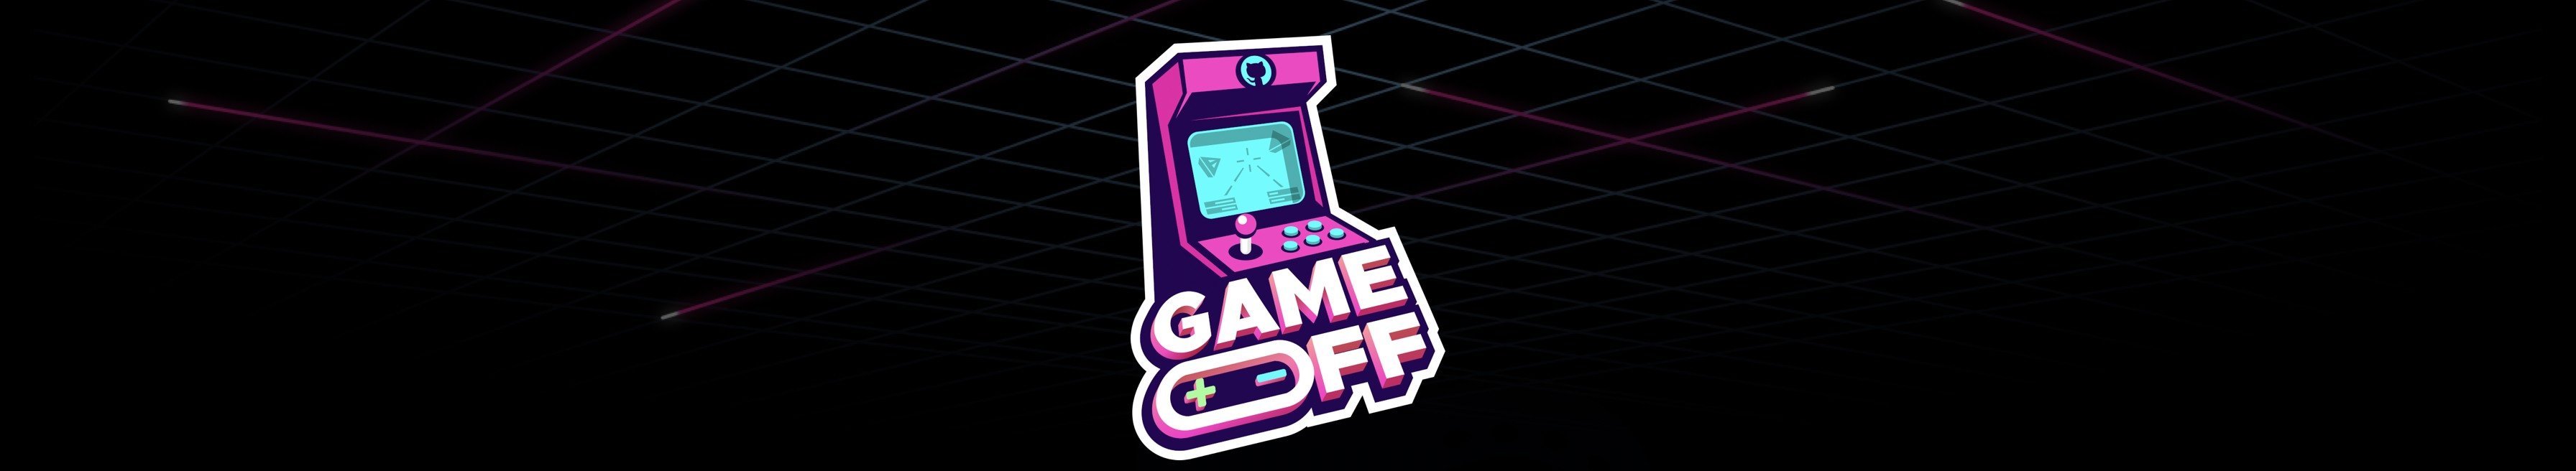 Game Off 2021 theme announcement - The GitHub Blog